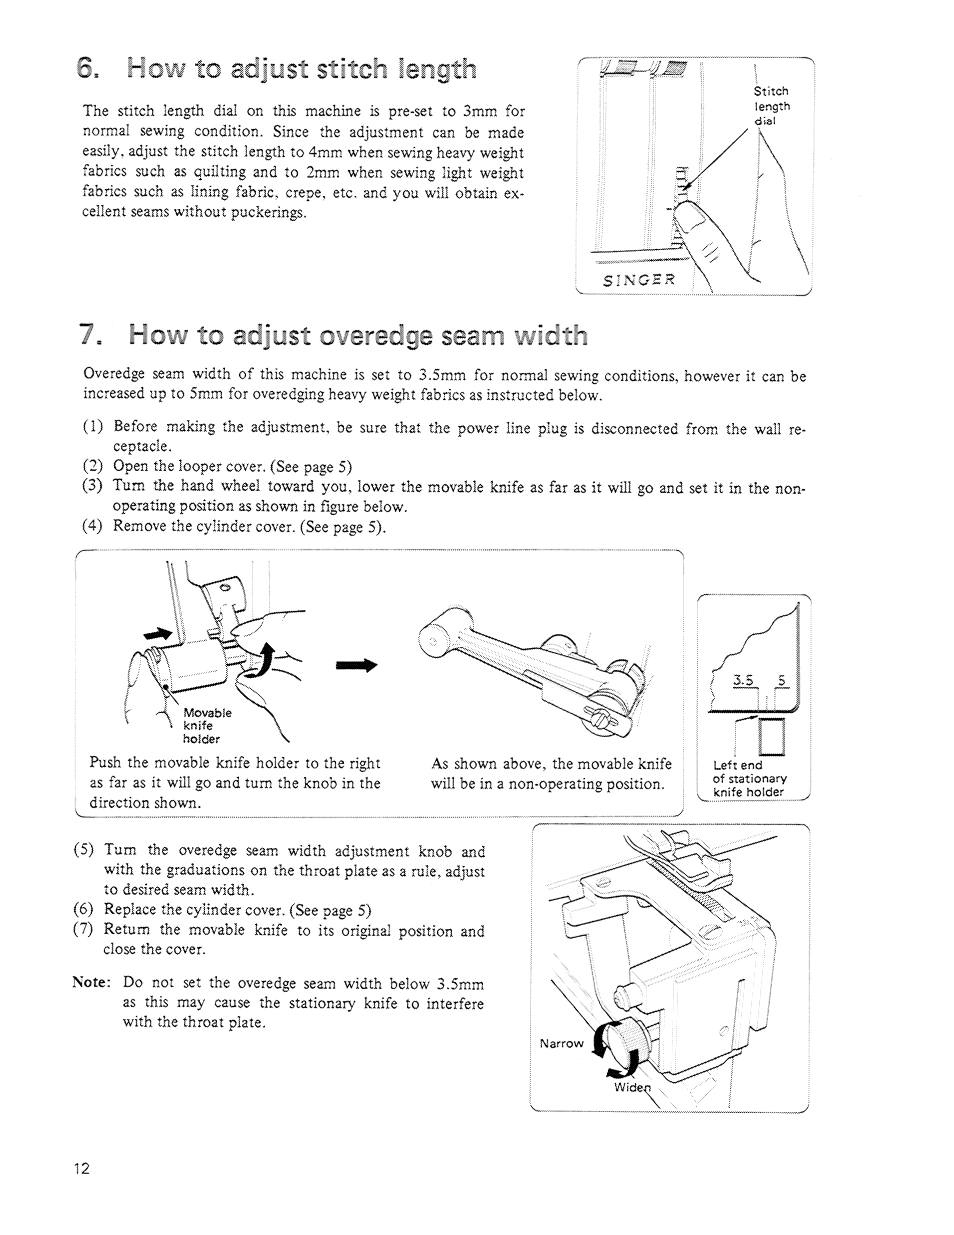 Hcv7 to eojost stitch length, Hcvr to ae|ost overedge seam width, How to adjust stitch length | How to adjust overedge seam width | SINGER 14U64A User Manual | Page 14 / 28